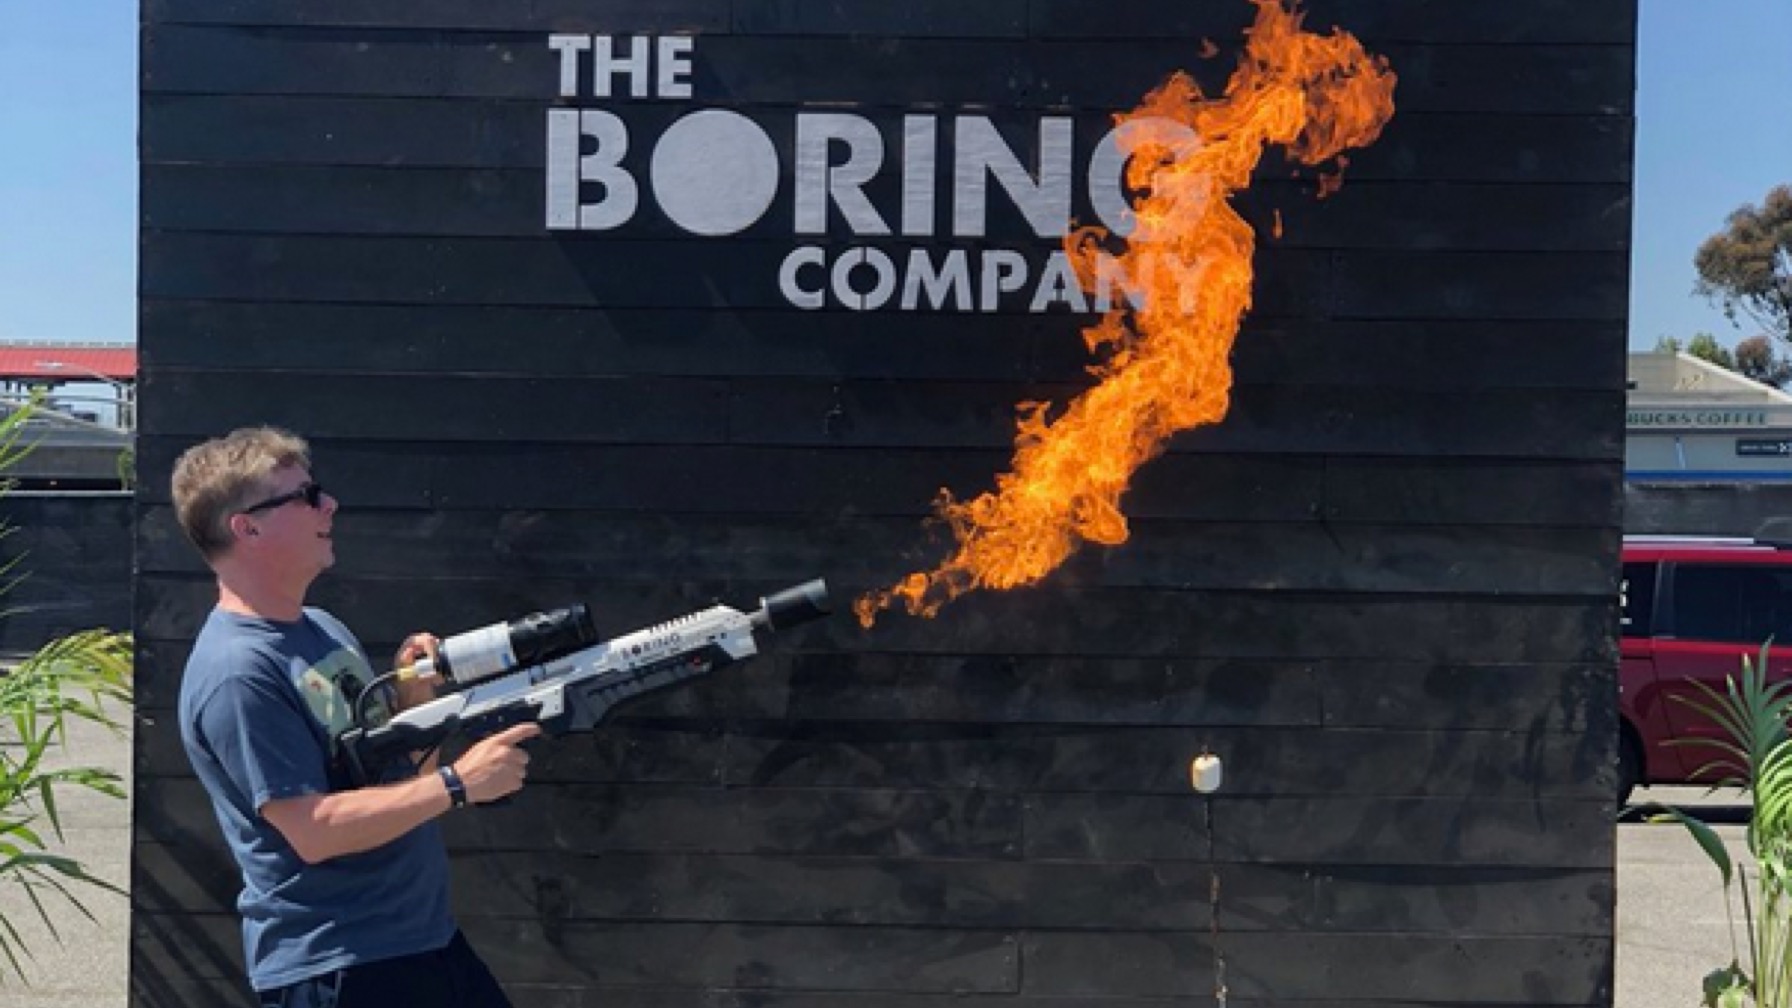 Elon Musk's Flamethrowers Are Finally Here. What Could Go Wrong?